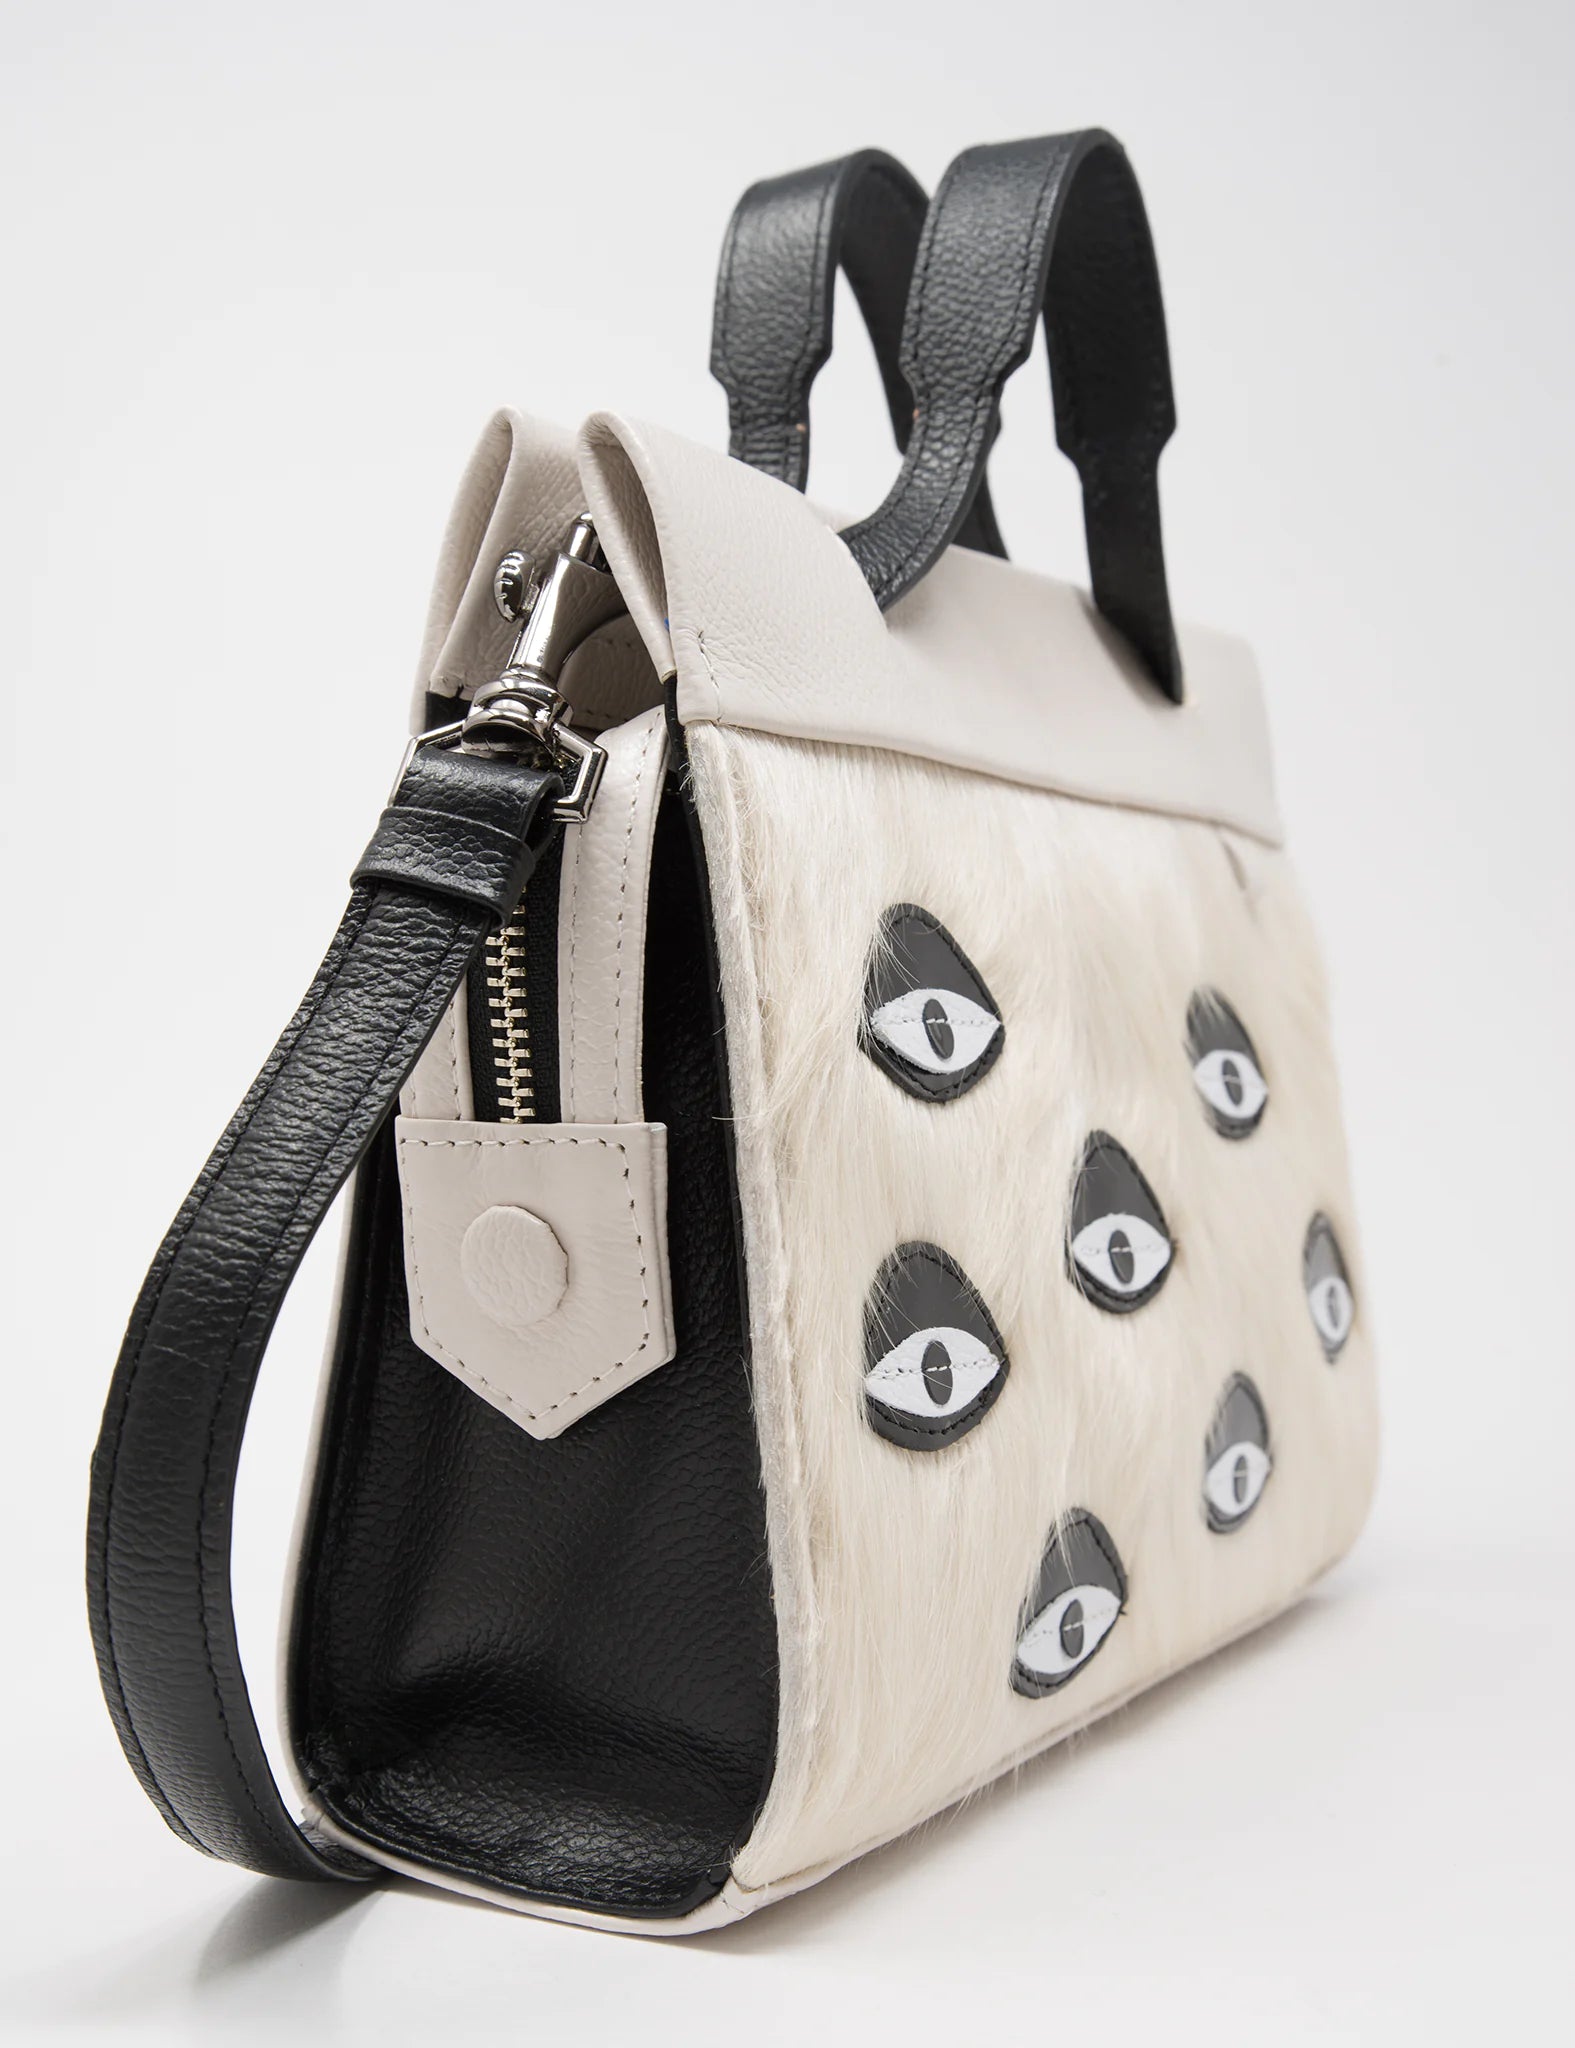 Vali Crossbody Small Cream Leather Bag - Eyes Applique Adjustable Handle - Close up view